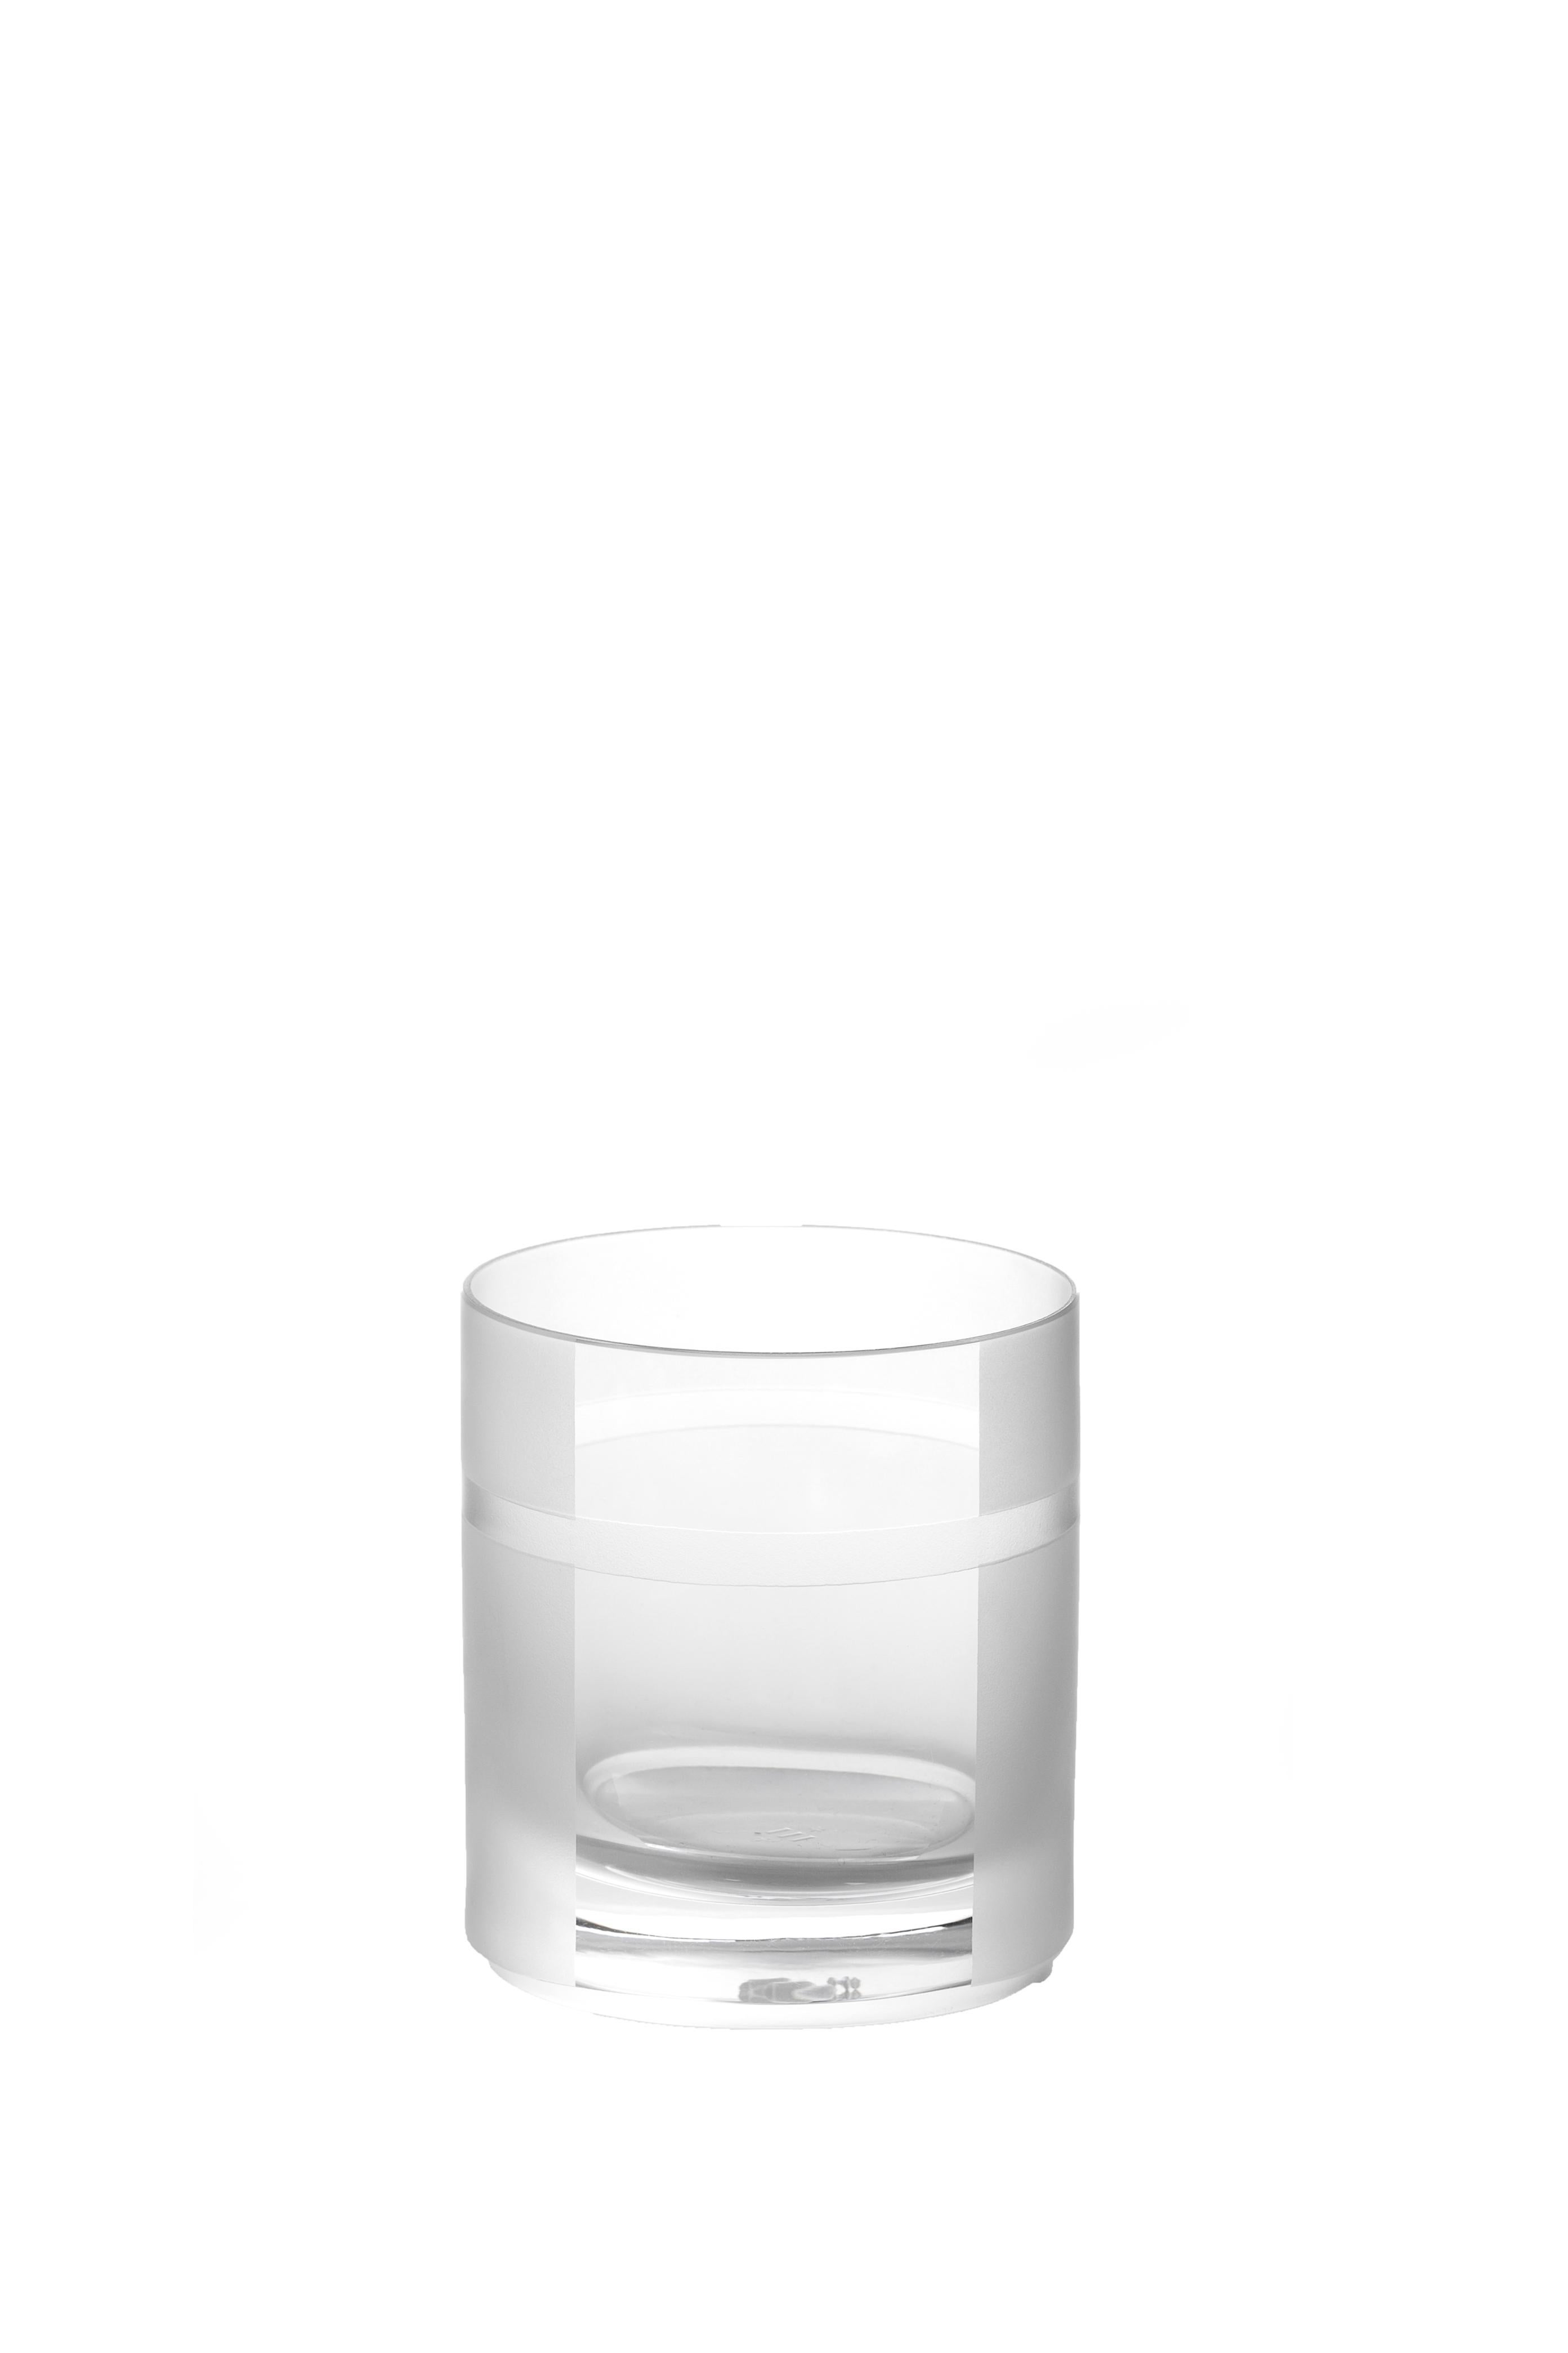 Hand-Crafted Scholten & Baijings Handmade Irish Crystal Whiskey Glass Elements Cut No. V For Sale